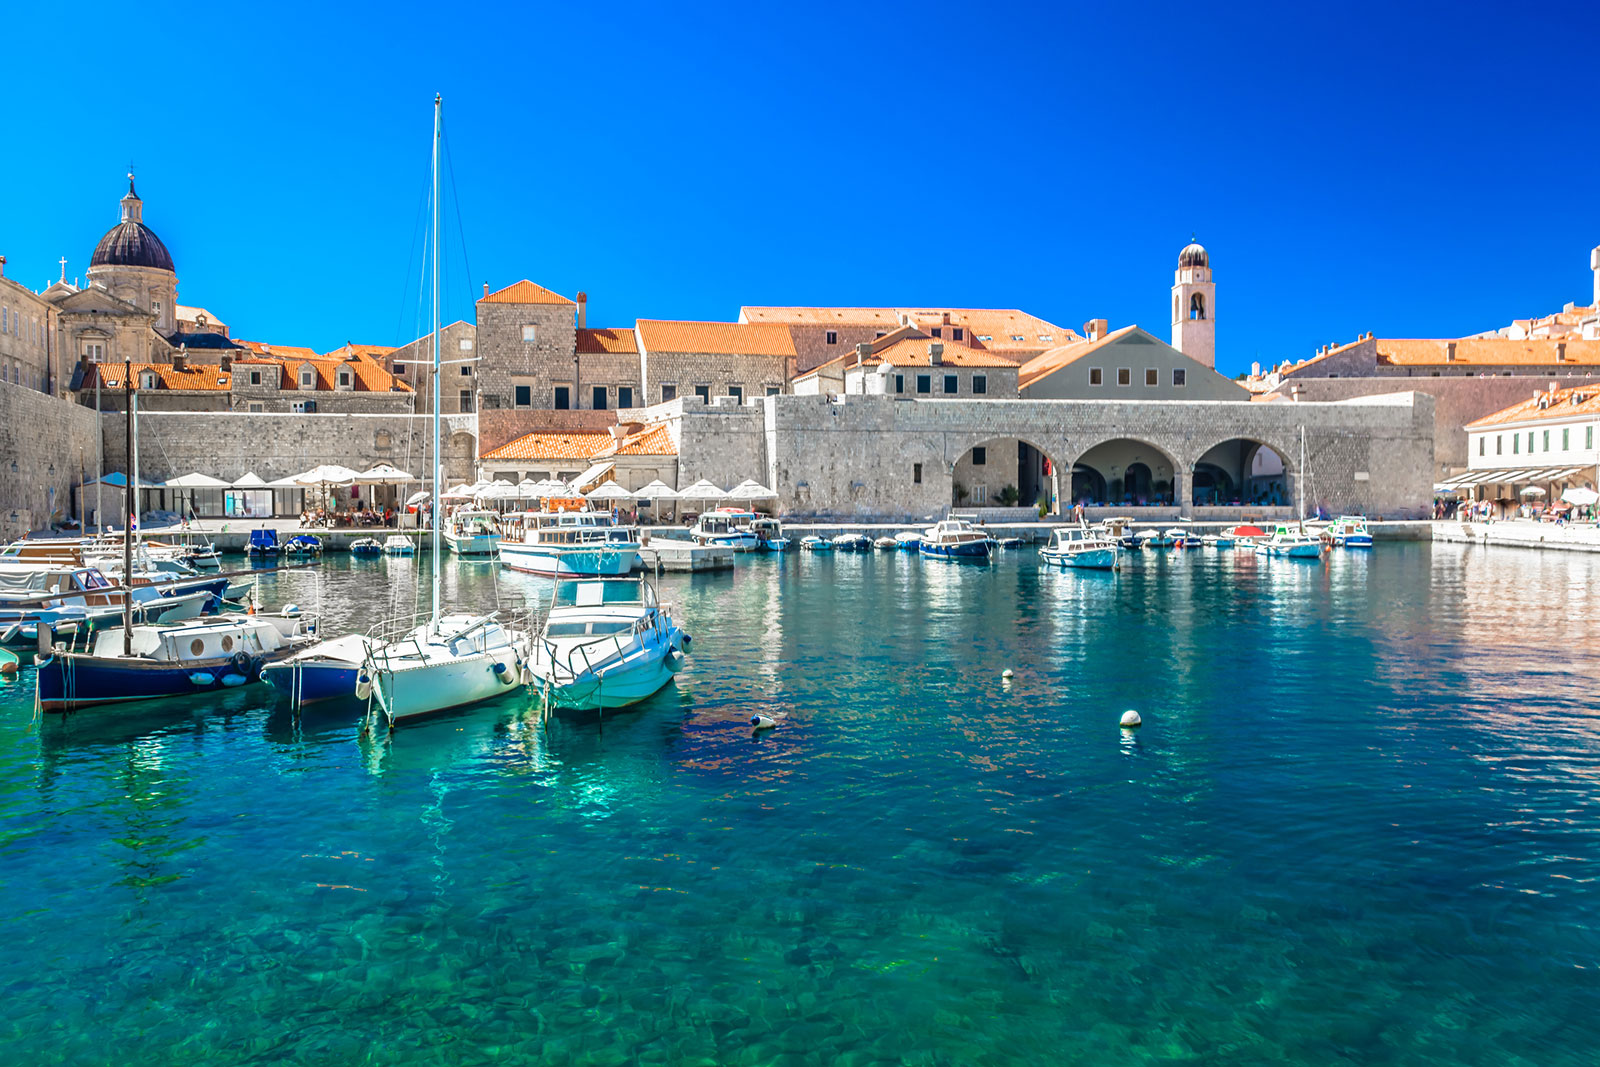 Tips to save money in Dubrovnik